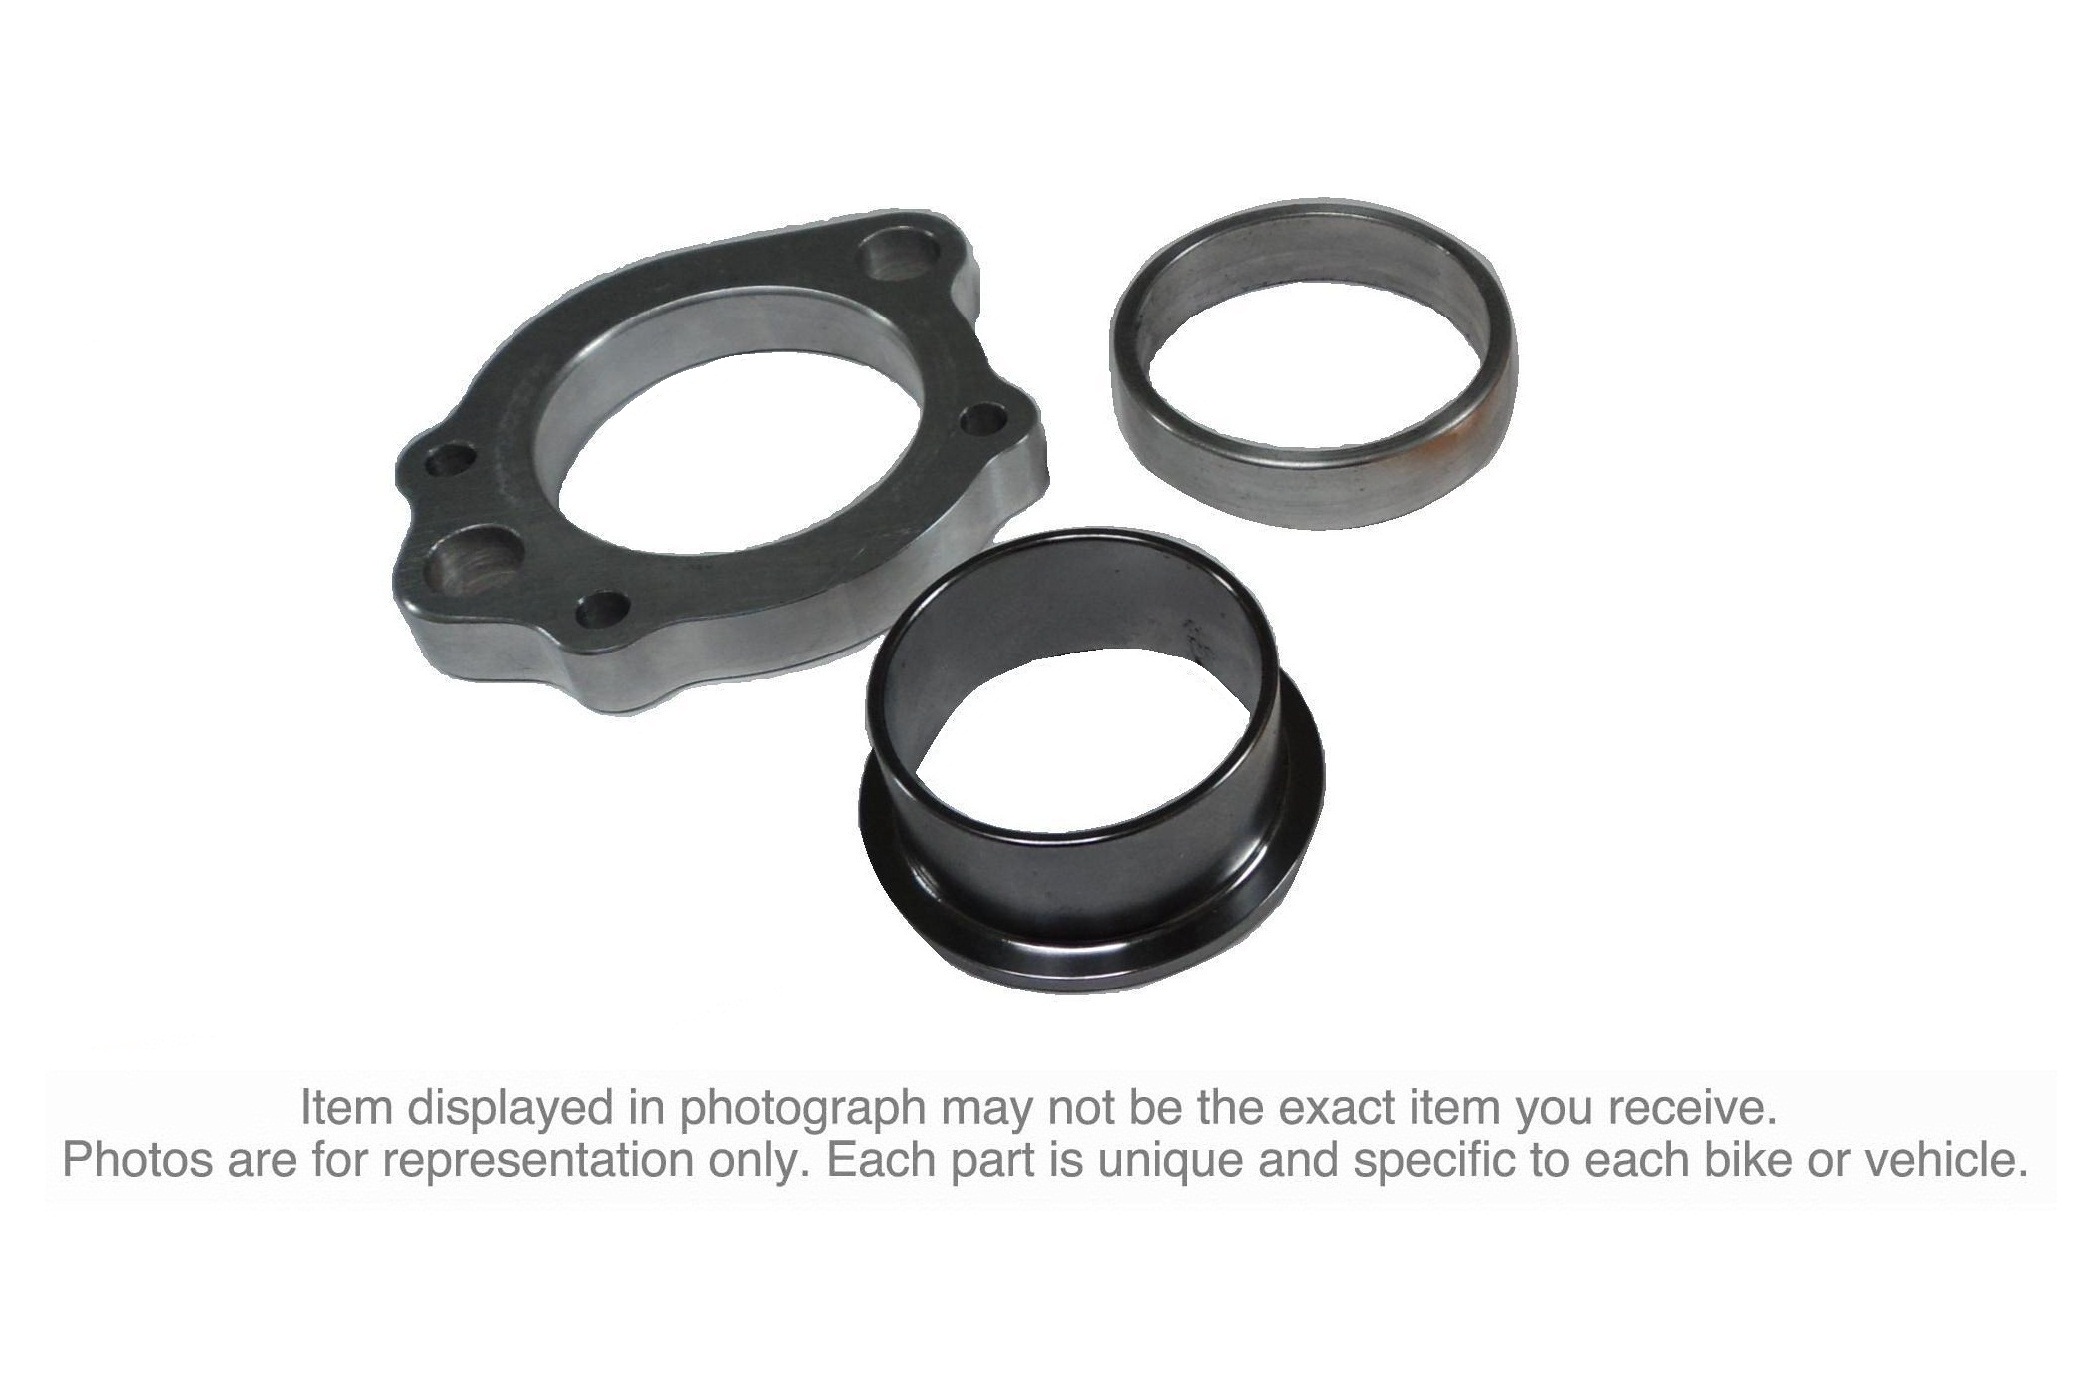 Replacement Flange Kits